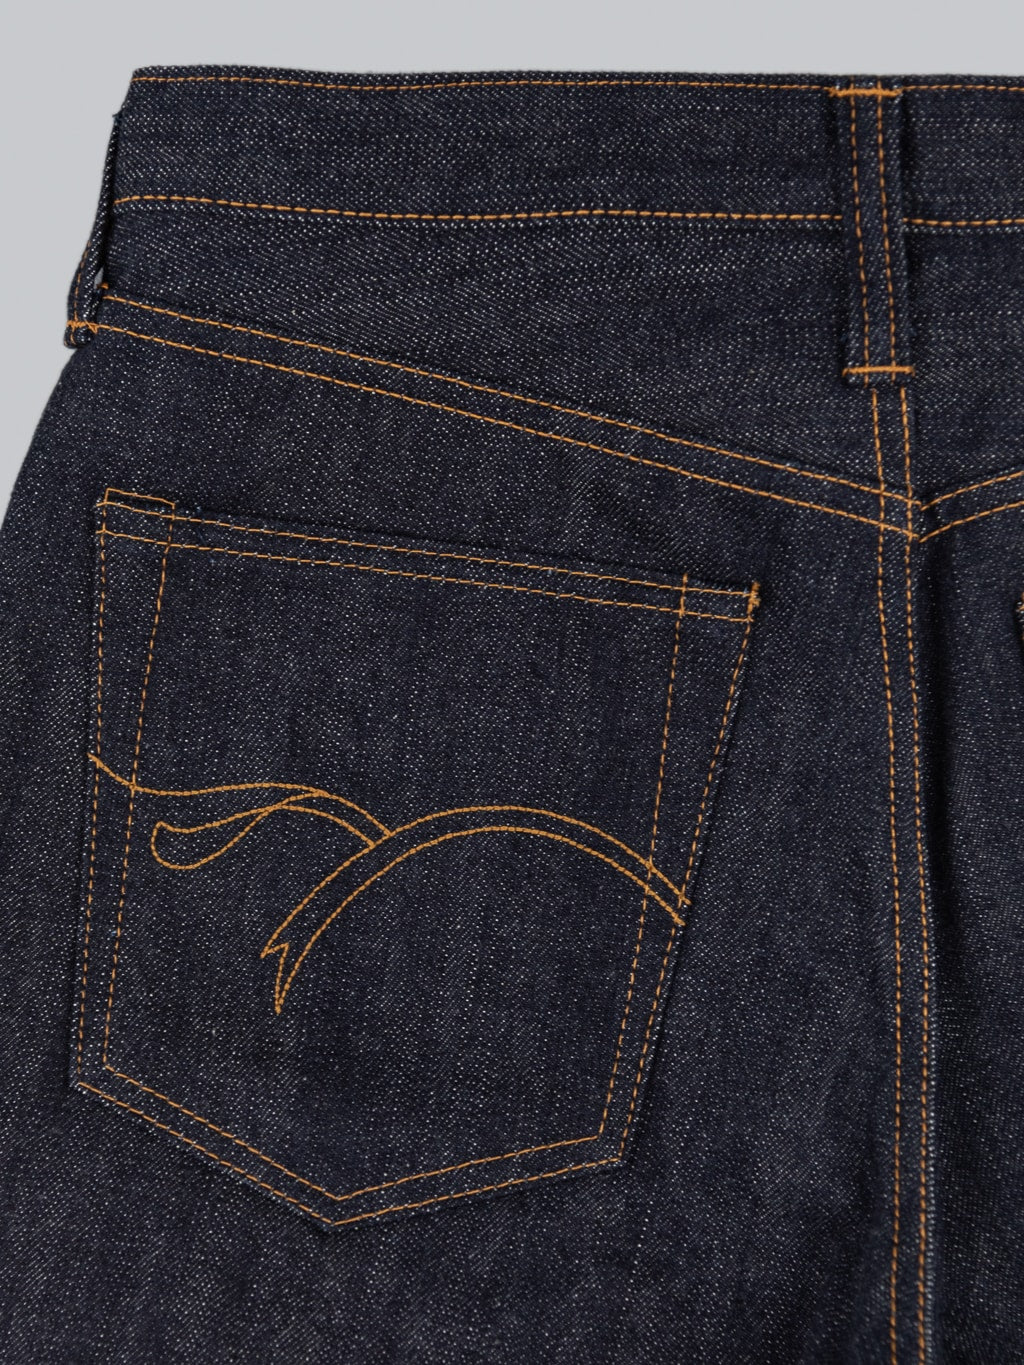 The Flat Head 3009 14.5oz straight tapered Jeans back pocket details